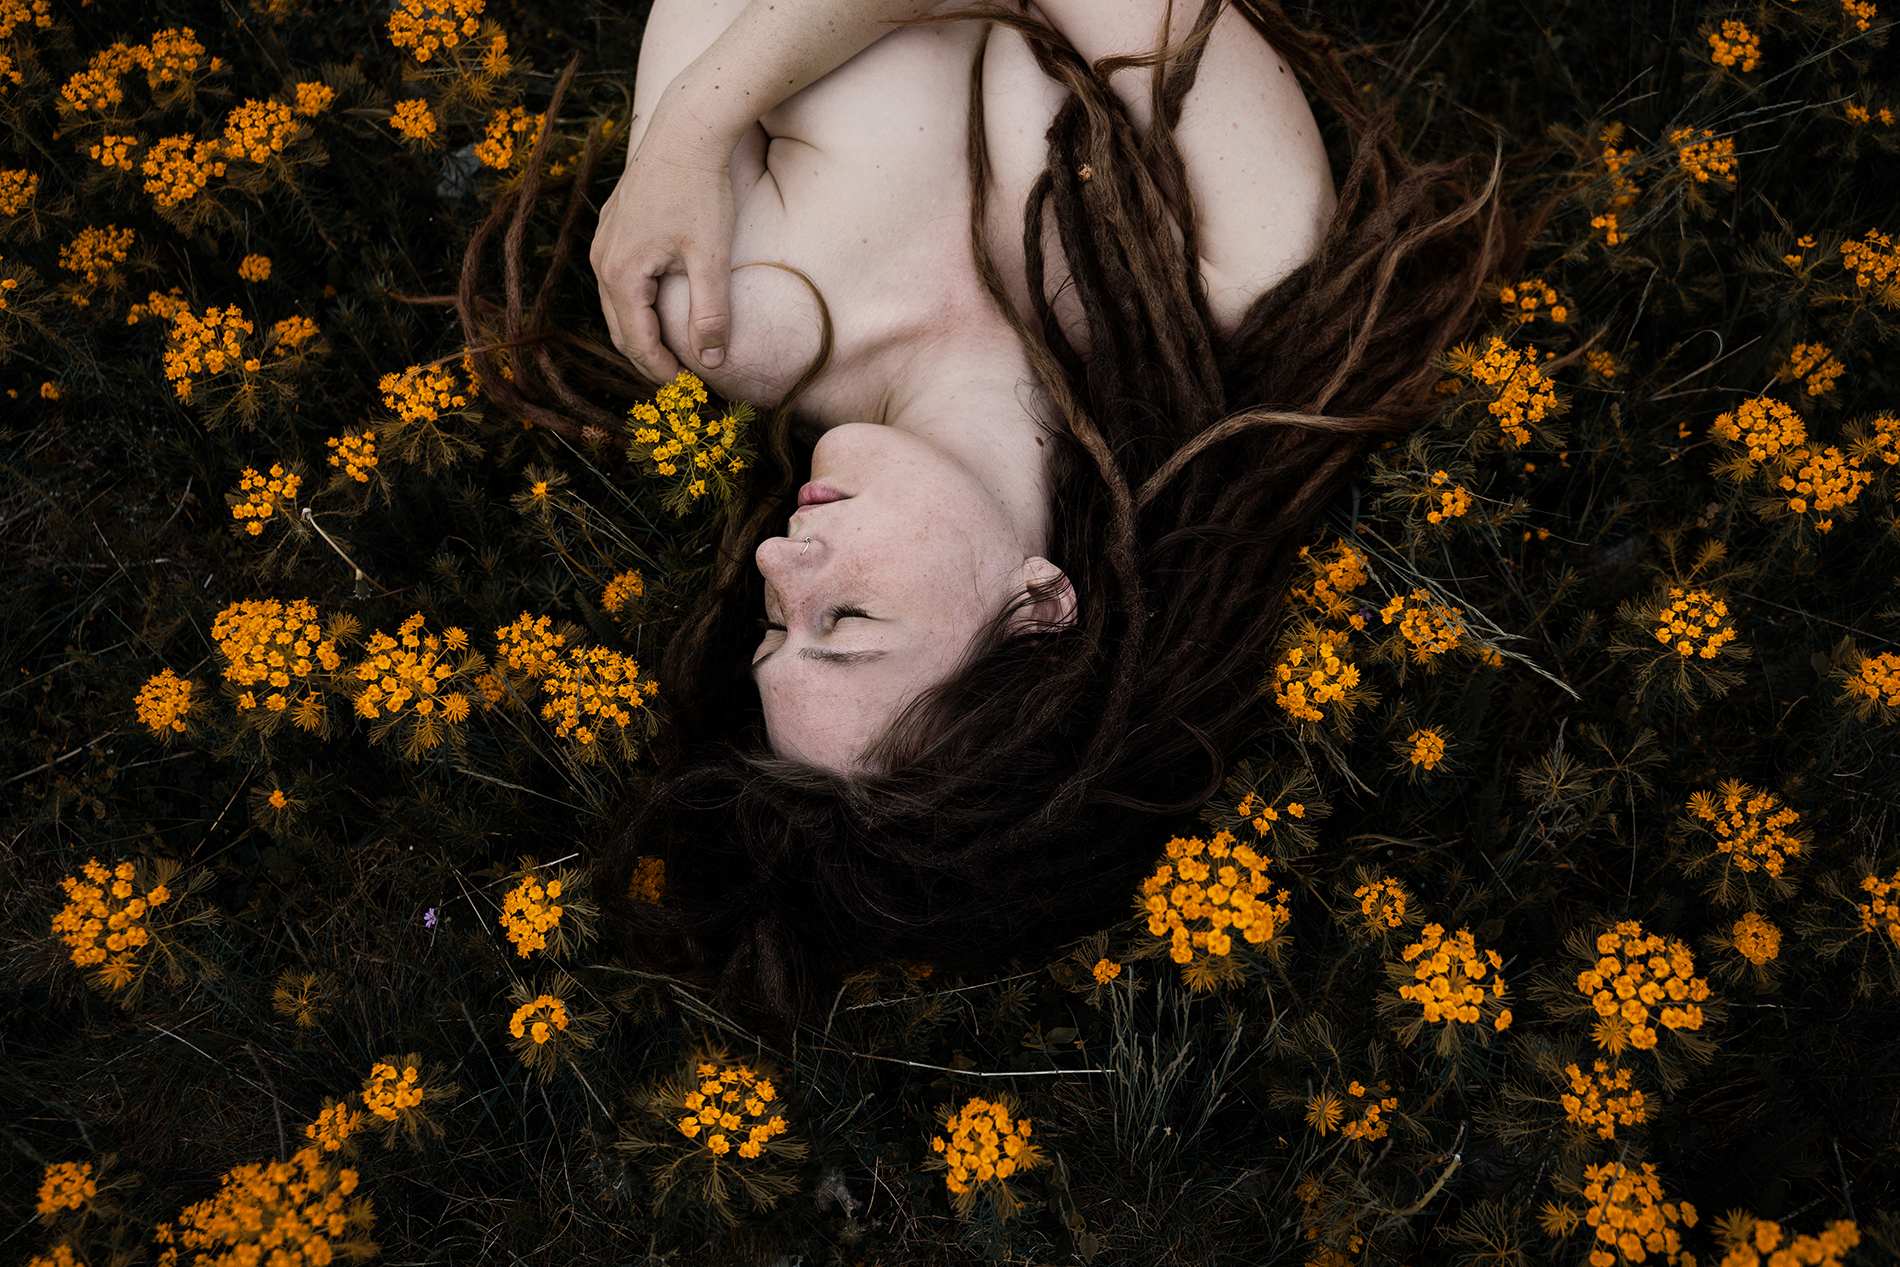 A sensual portrait of a woman inbetween flowers taken from above. Self portrait by photographer Anna Heimkreiter.